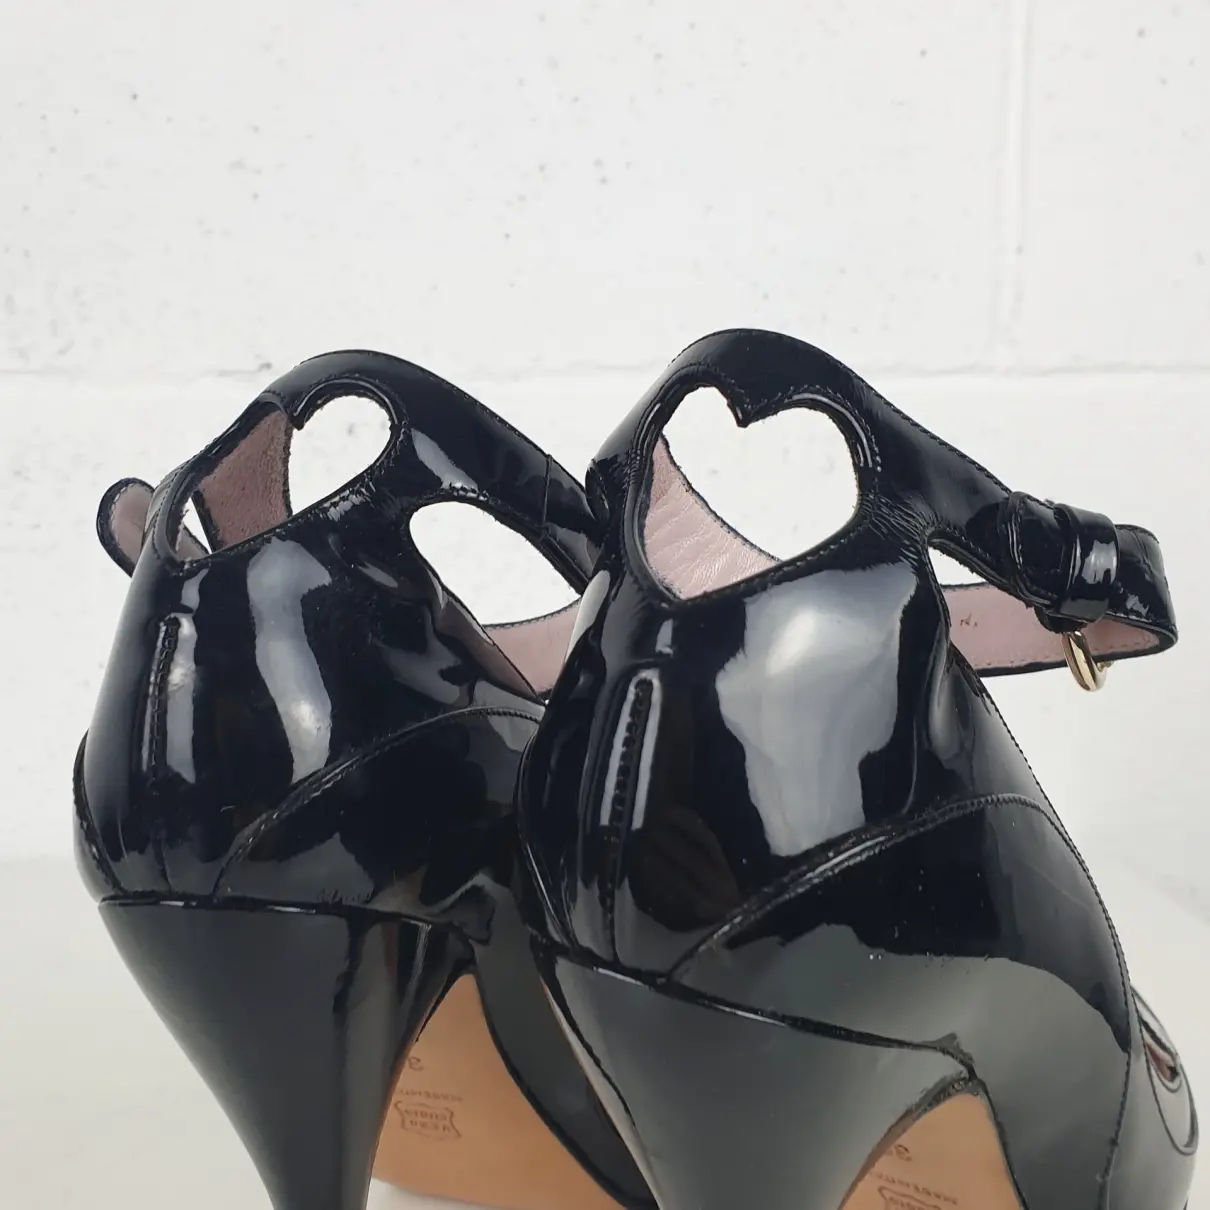 Luella Patent leather heels for sale